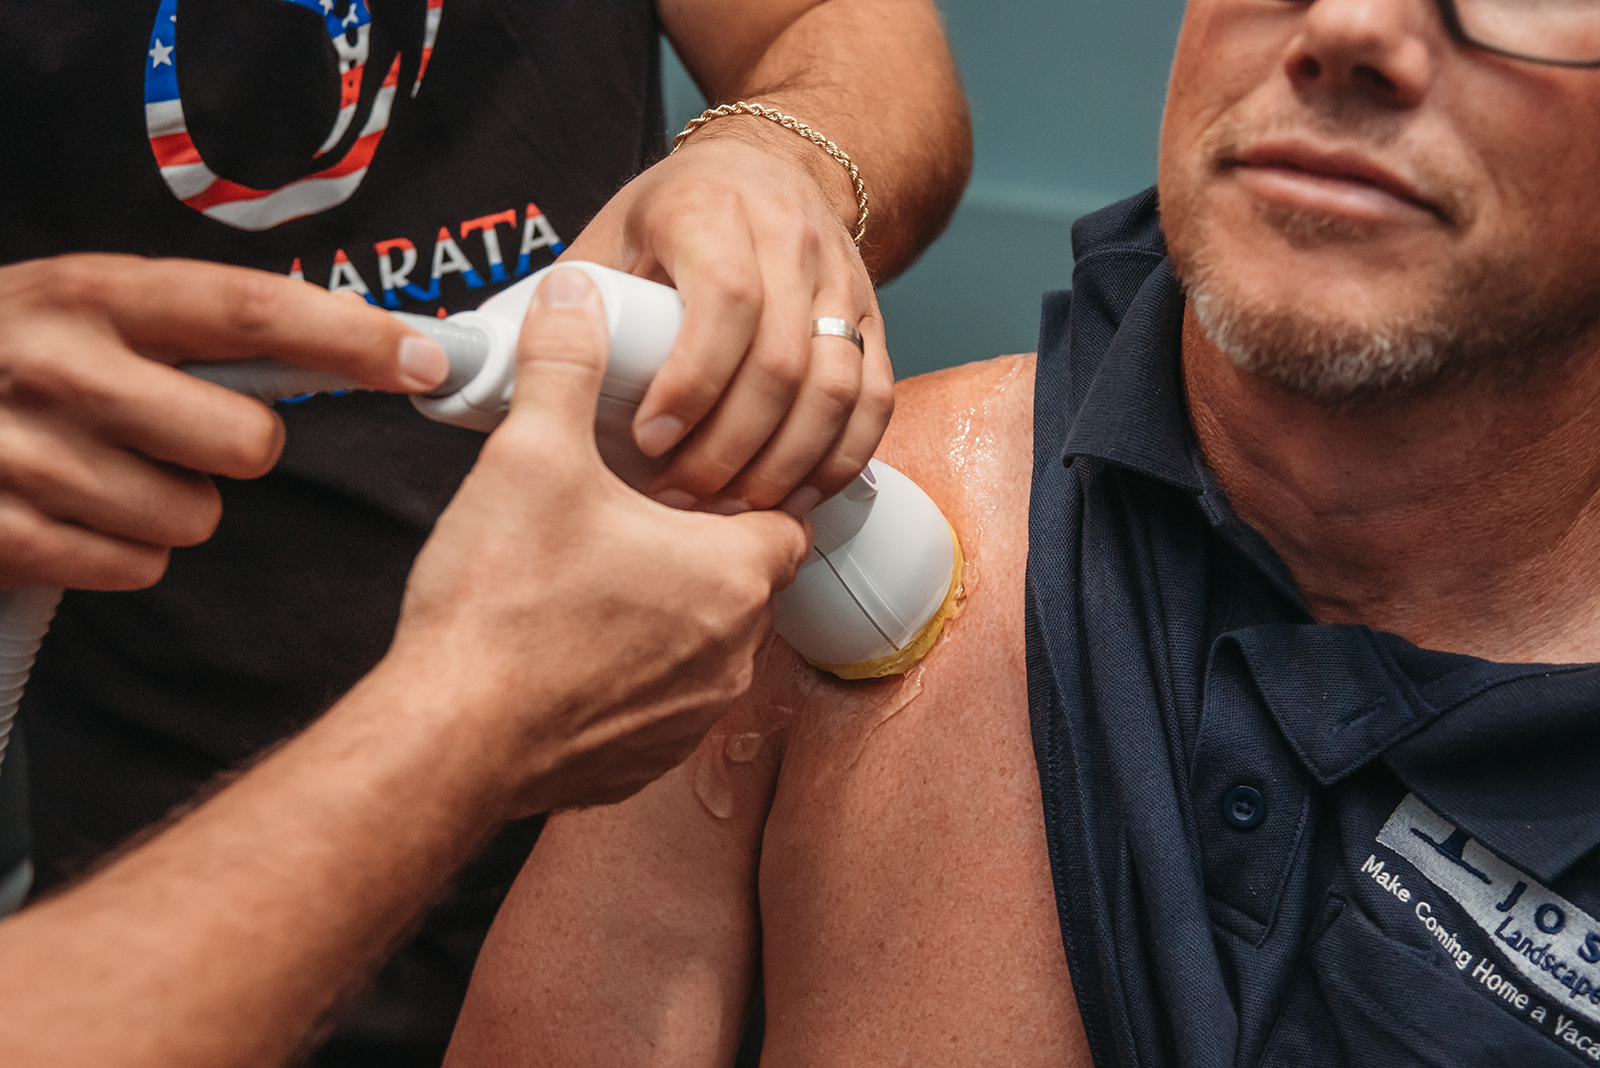 Overcoming Frozen Shoulder Pain with SoftWave Therapy at Camarata Chiropractic & Wellness